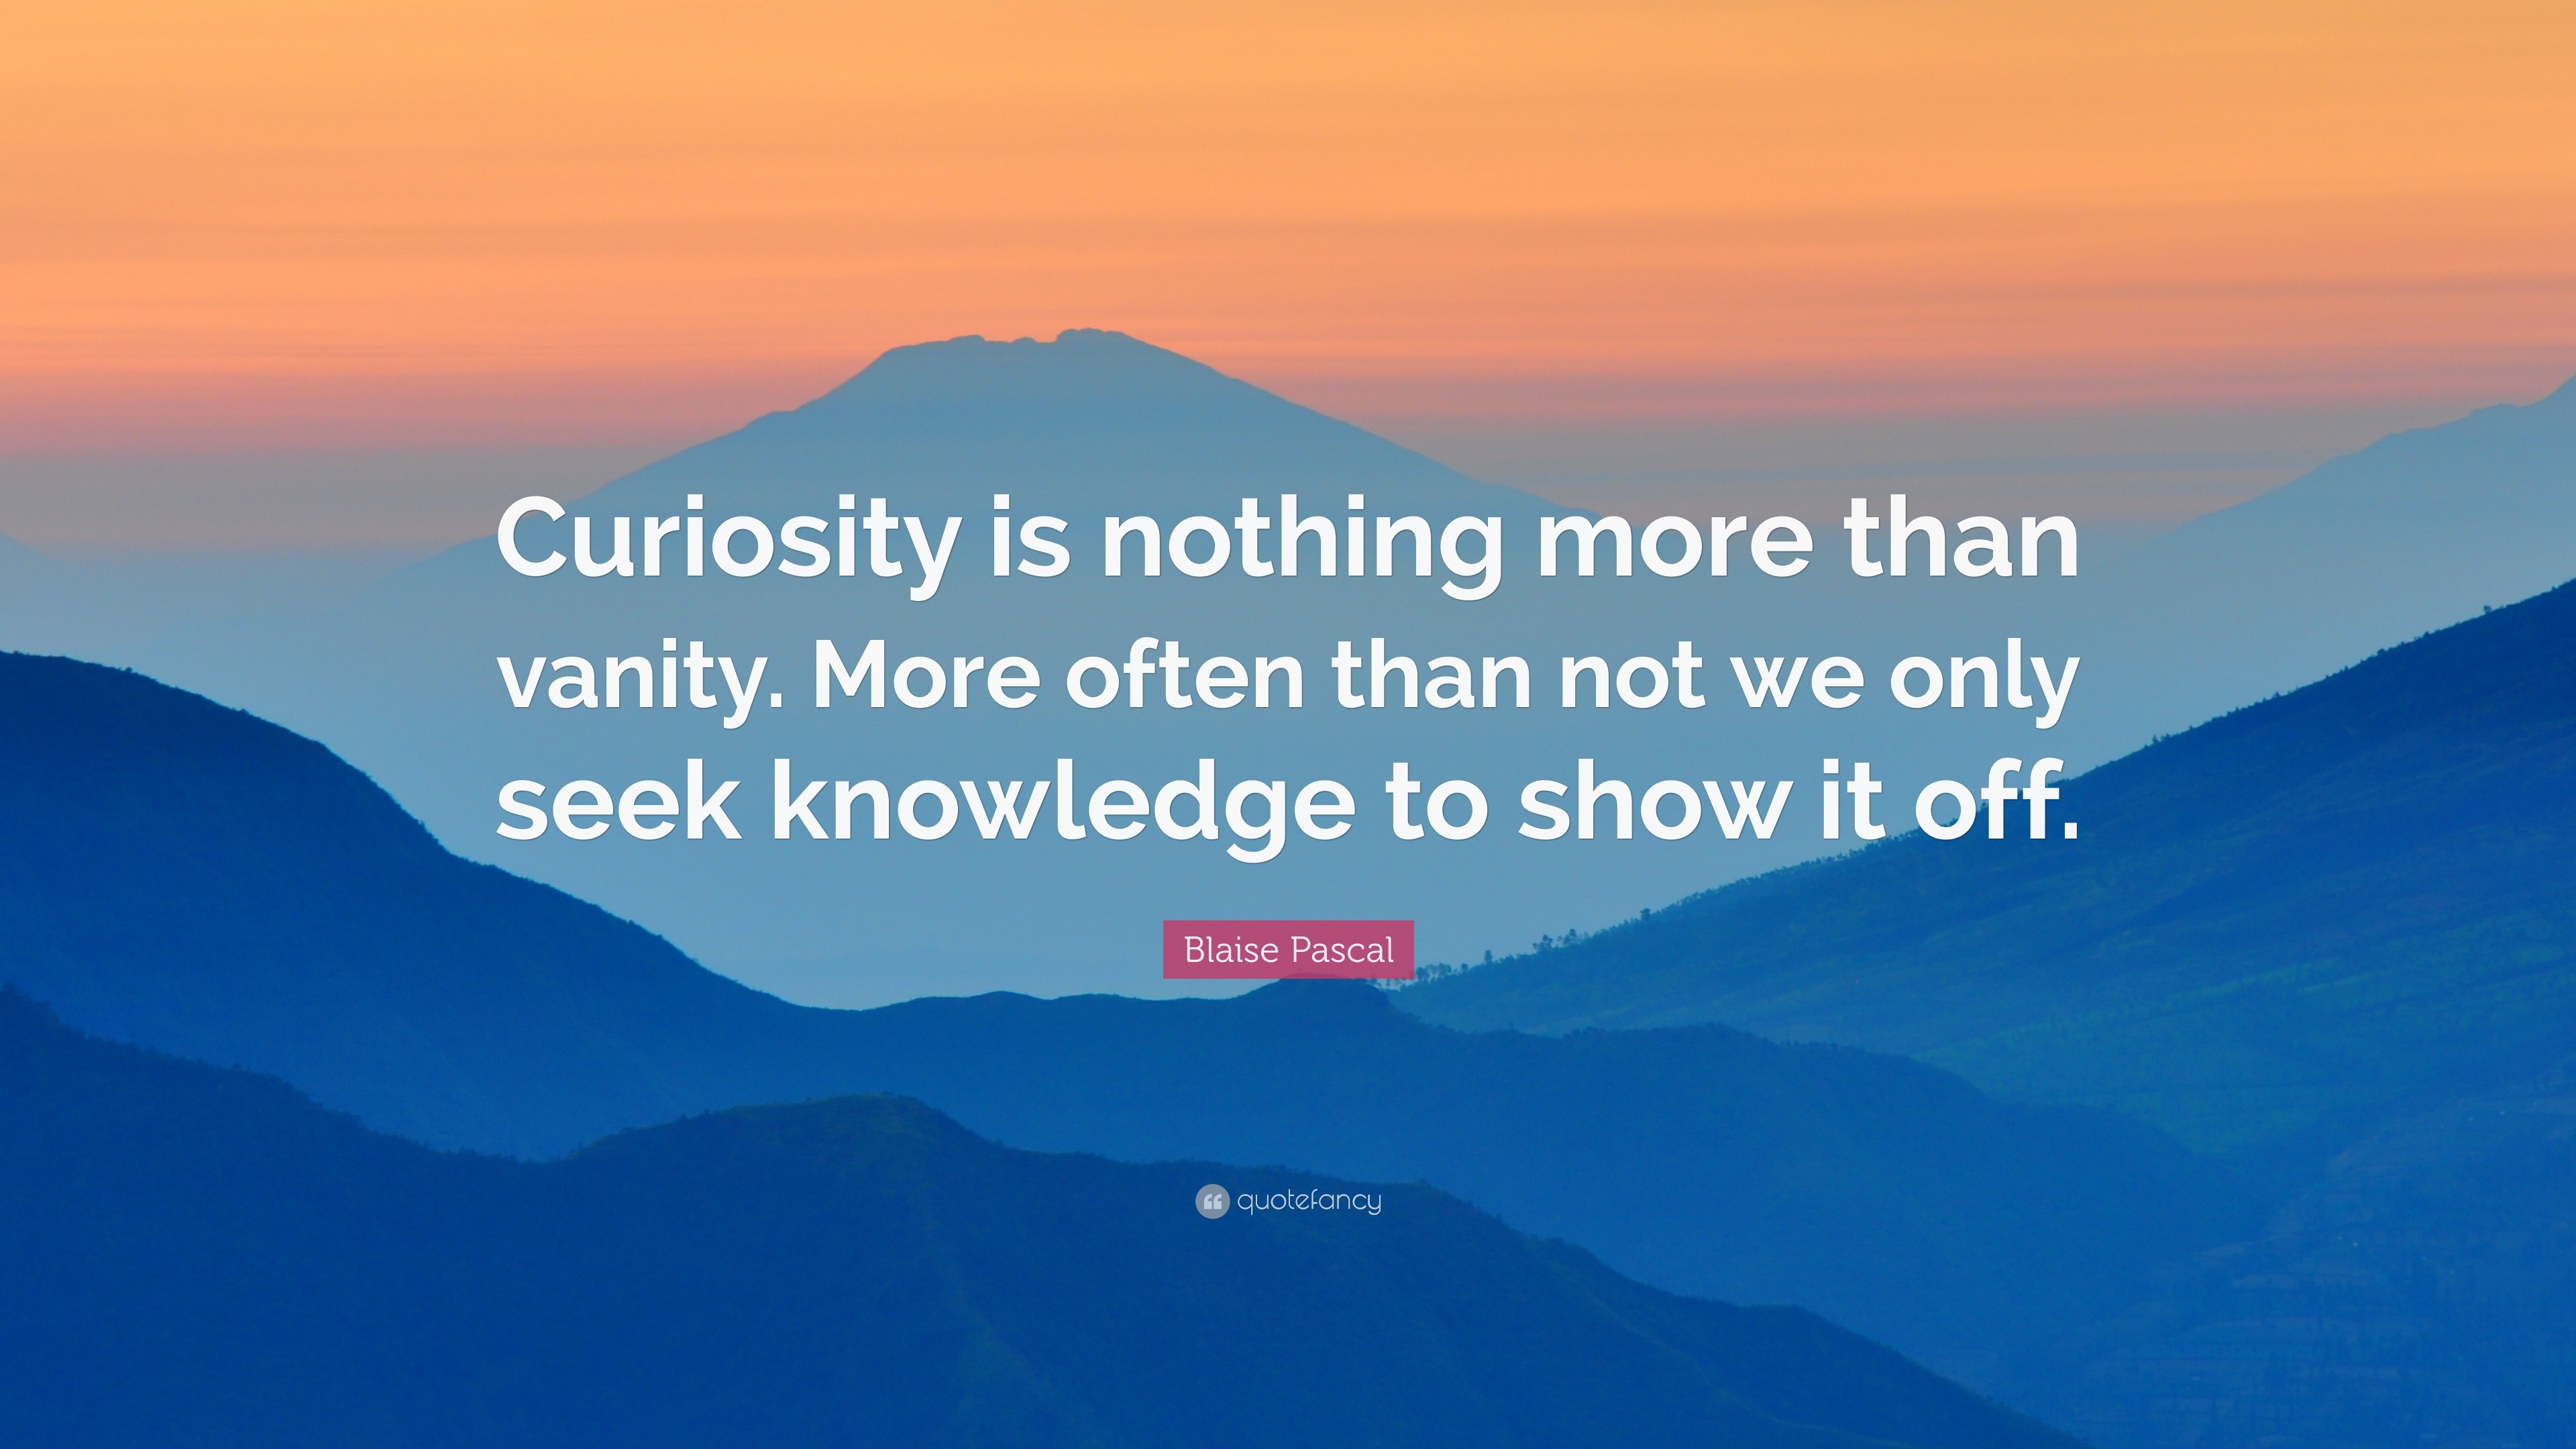 Blaise Pascal Quote: “Curiosity is nothing more than vanity. More often ...